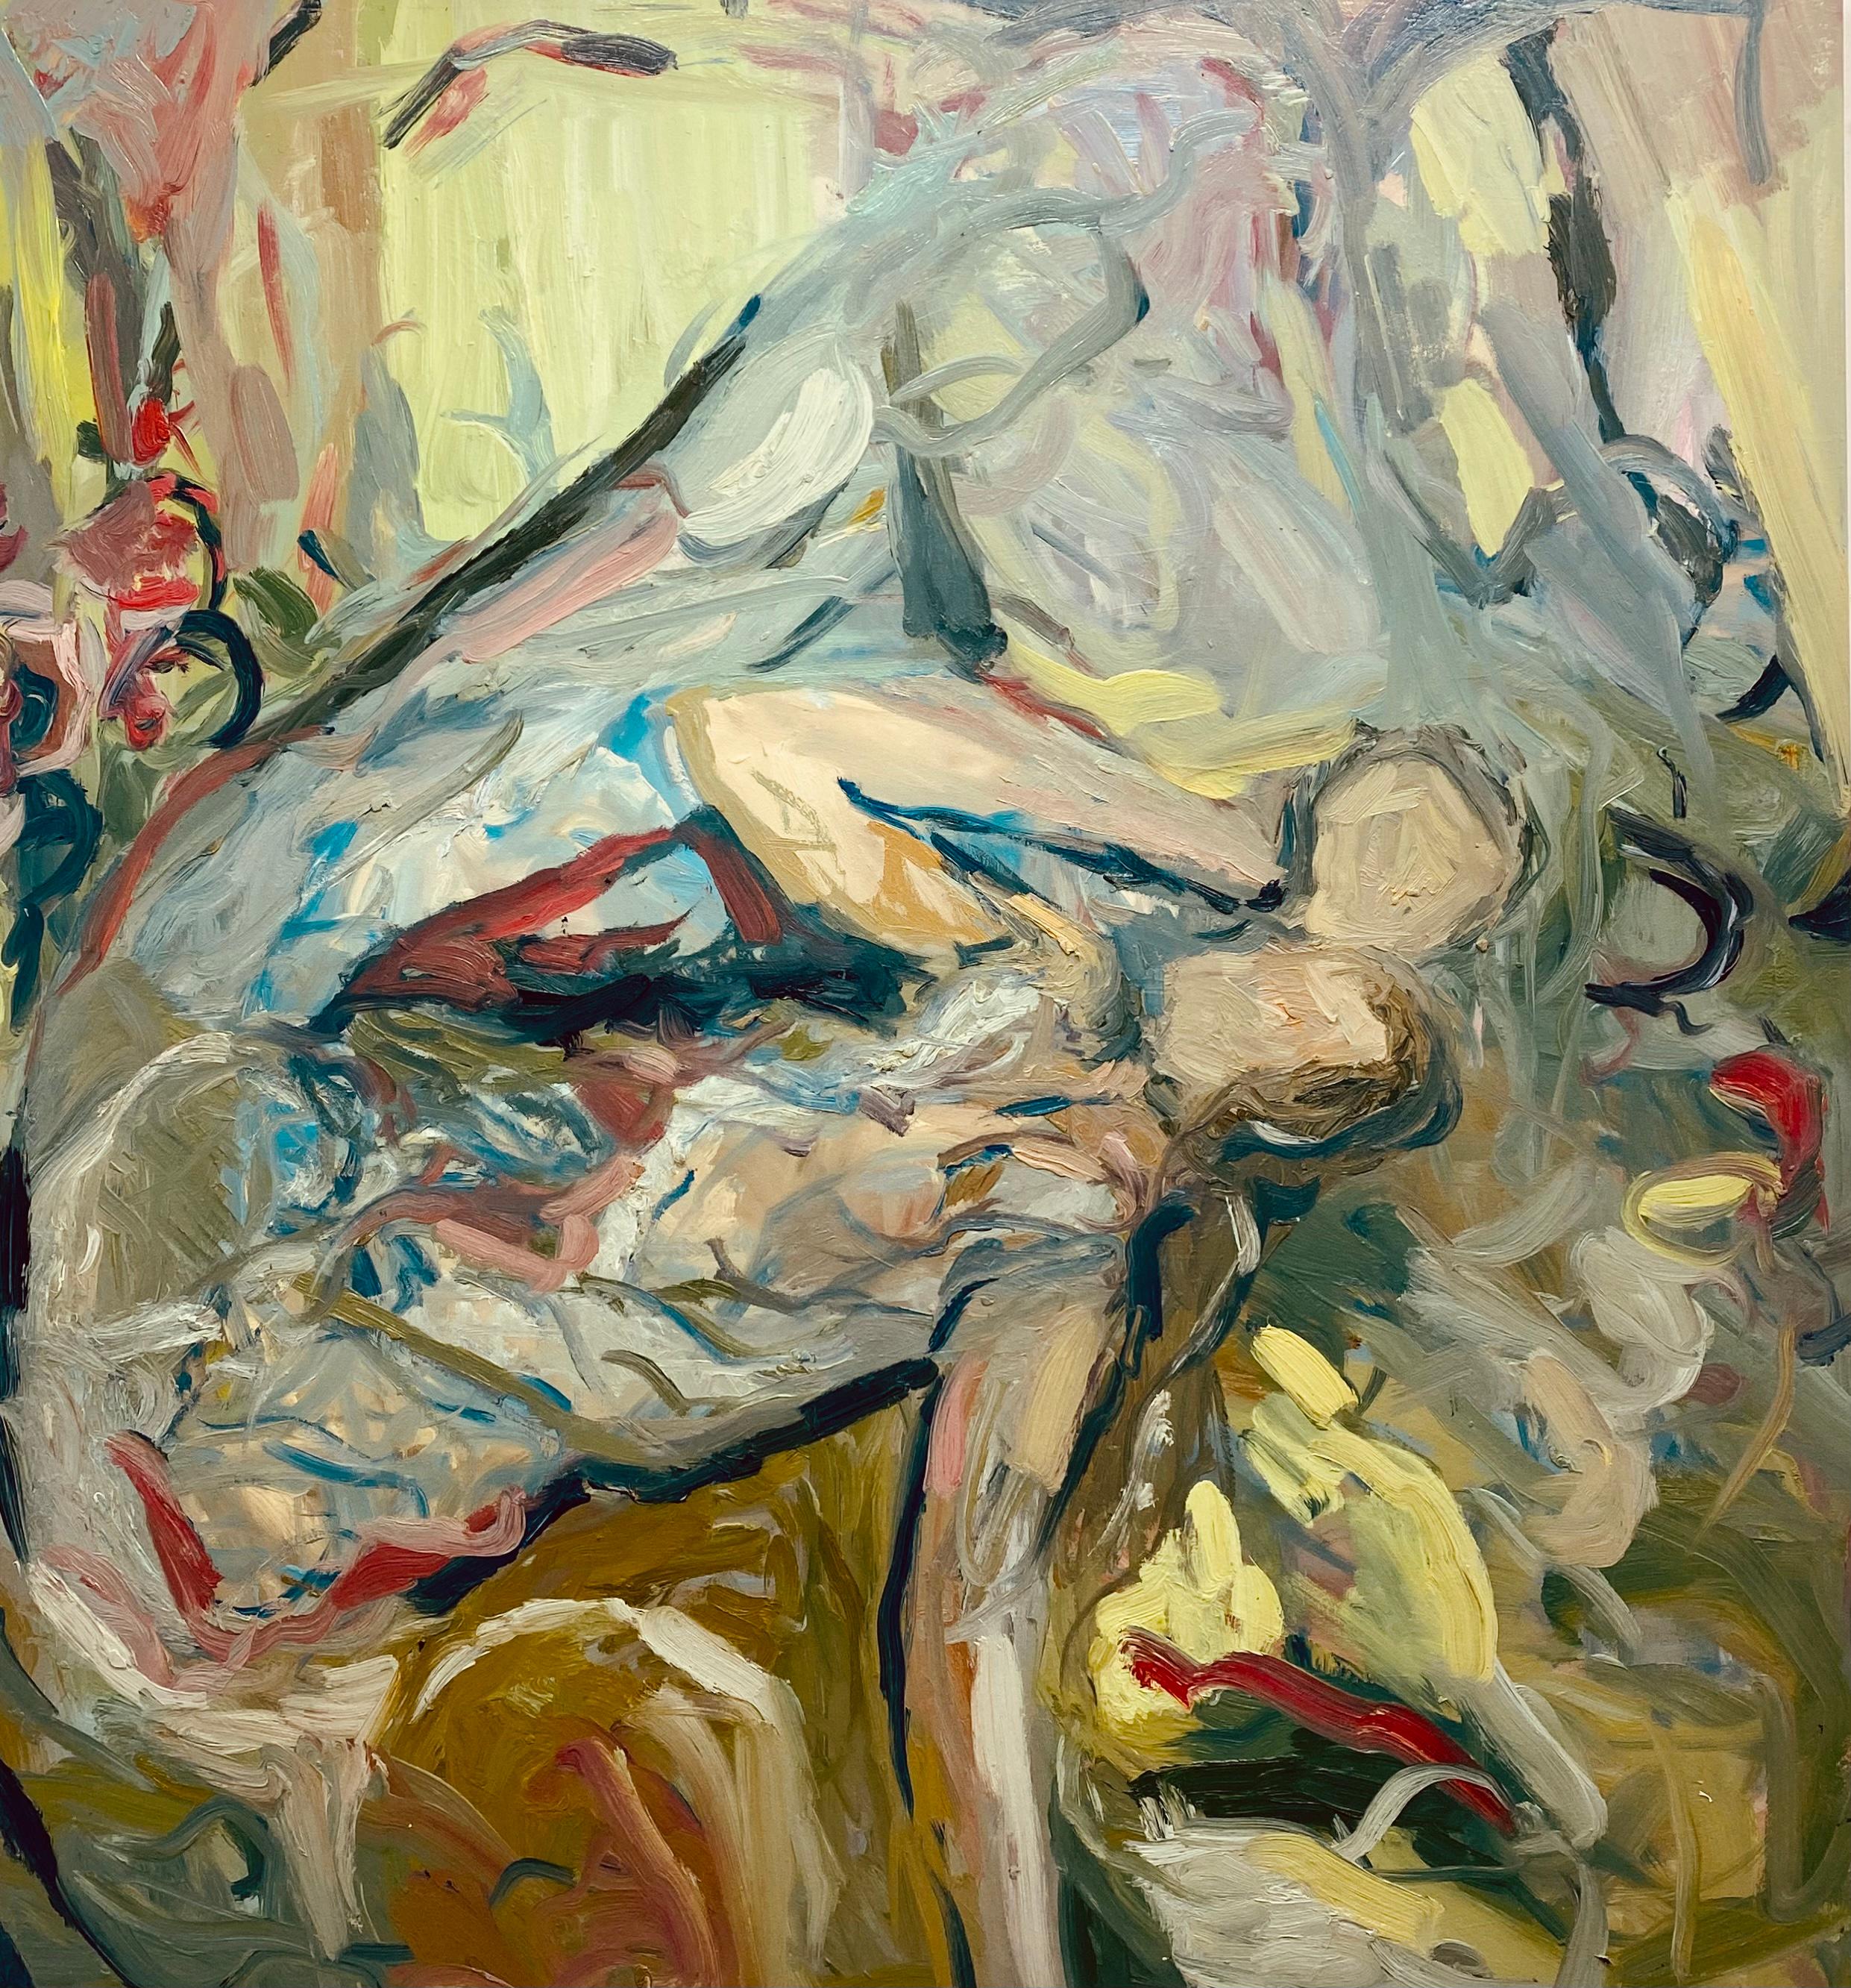 FRANCESCA OWEN  Figurative Painting - Sleeping Under A Lemon Yellow Sky. Large Expressionist Figurative Oil Painting